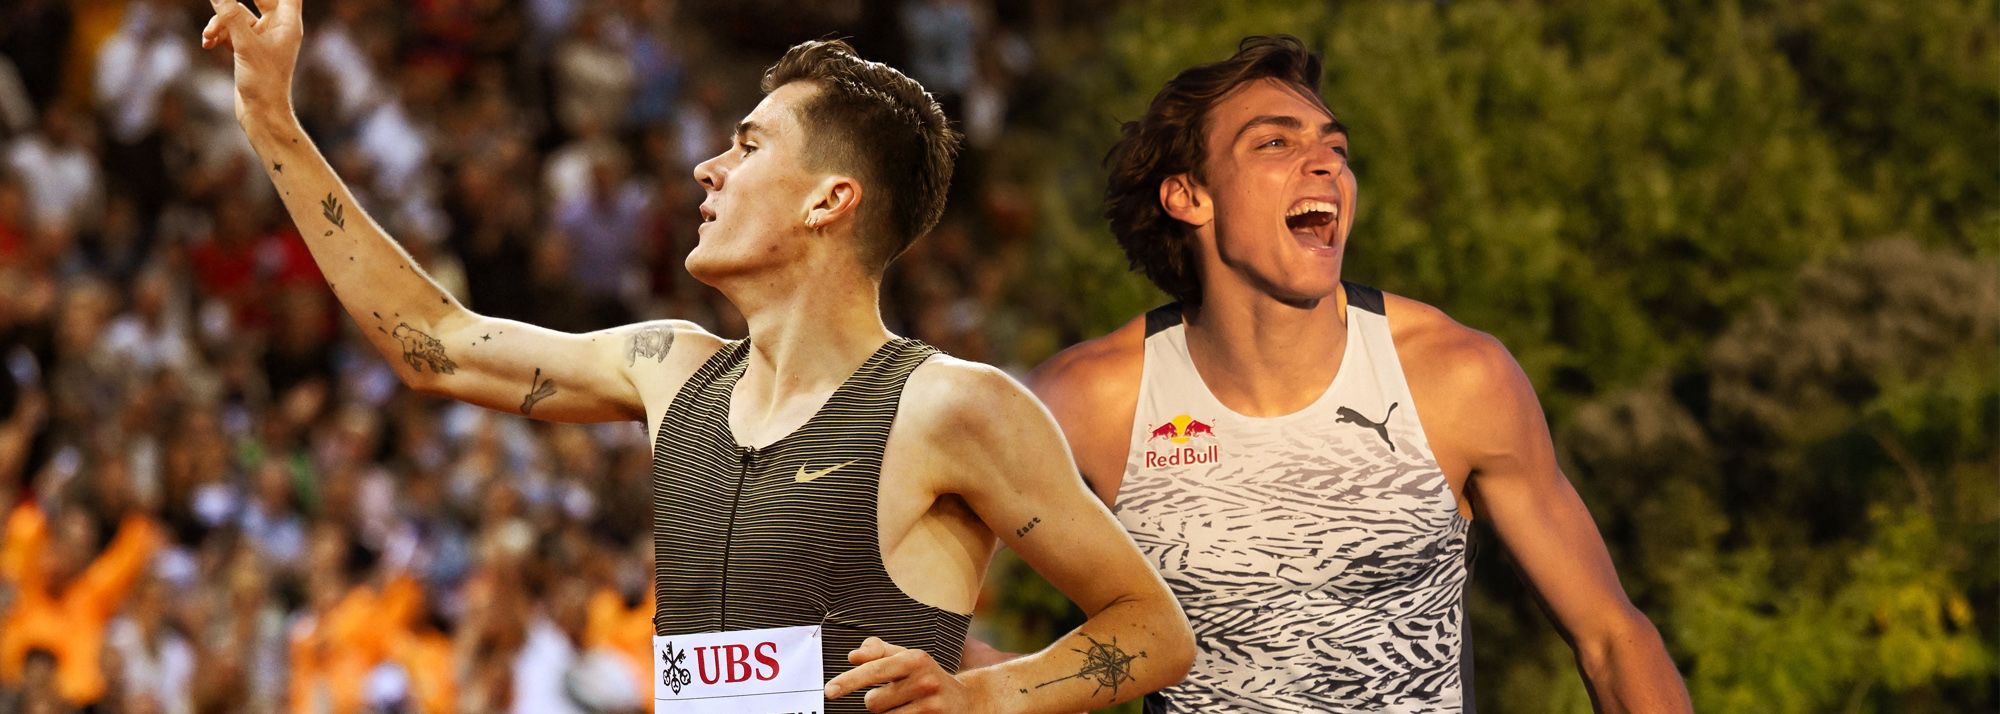 World and Olympic champions Mondo Duplantis and Jakob Ingebrigtsen will be in action at the Kamila Skolimowska Memorial on 16 July